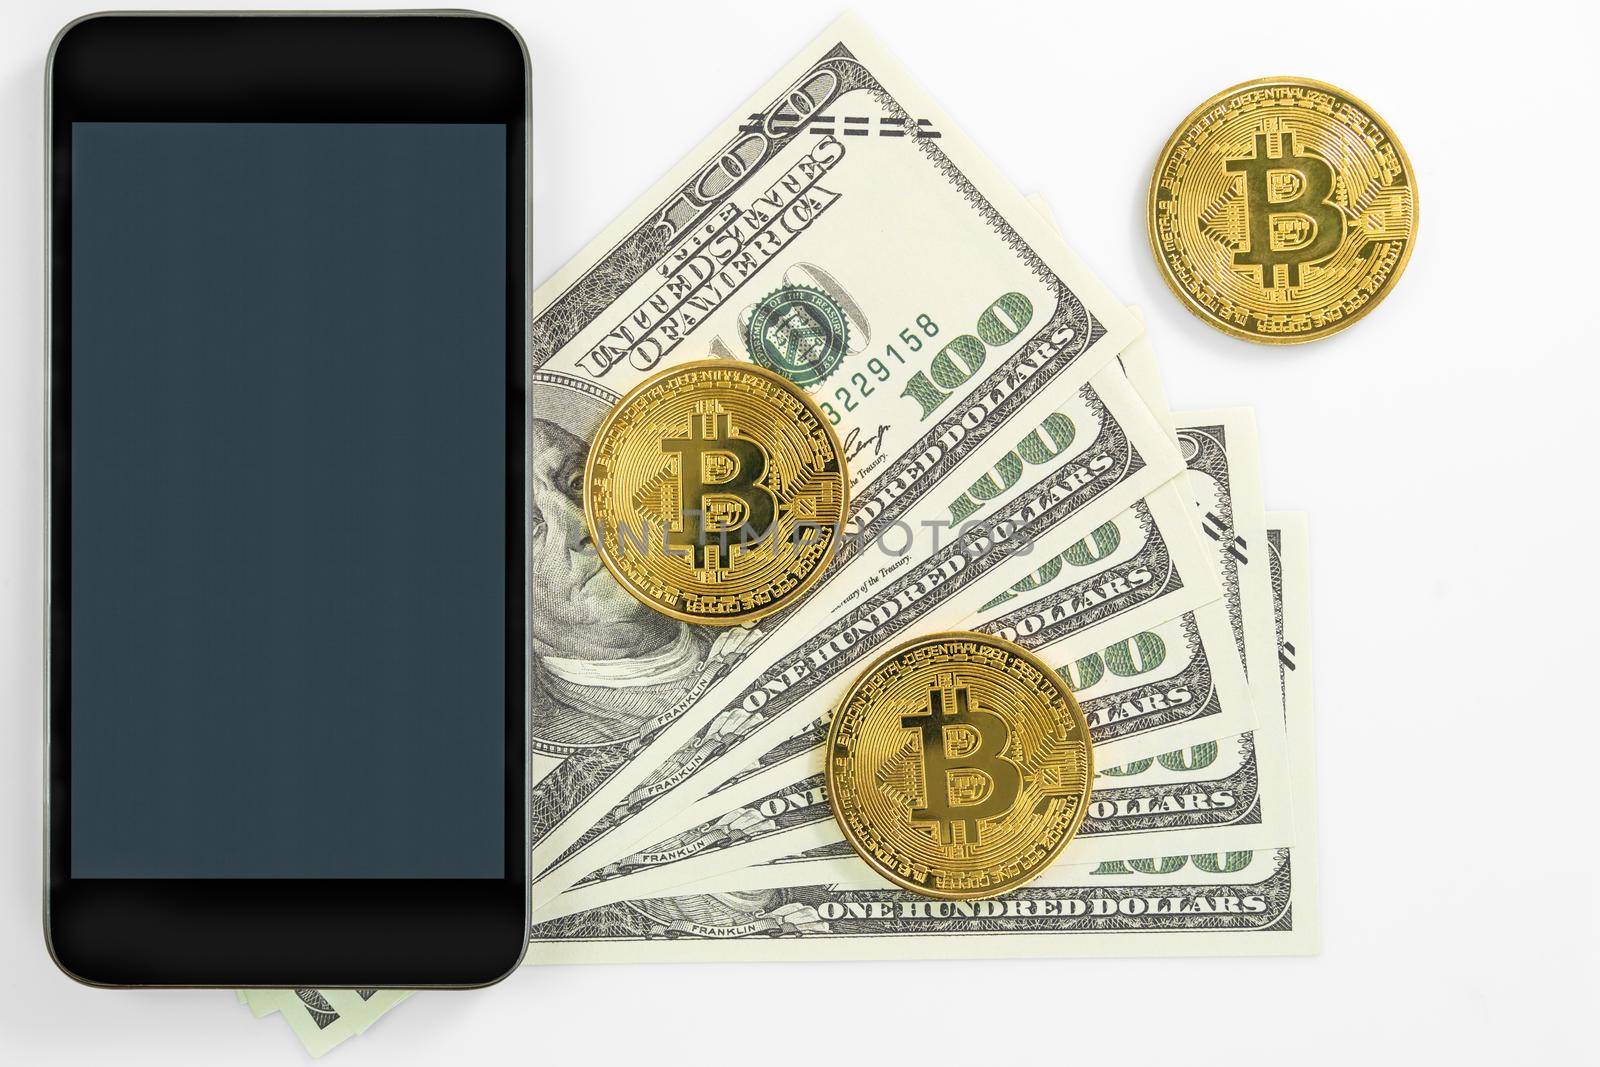 Bitcoins coin and  US banknotes of one hundred dollars with smartphone mockup. Close up of metal shiny bitcoin crypto currency coins and US dollar